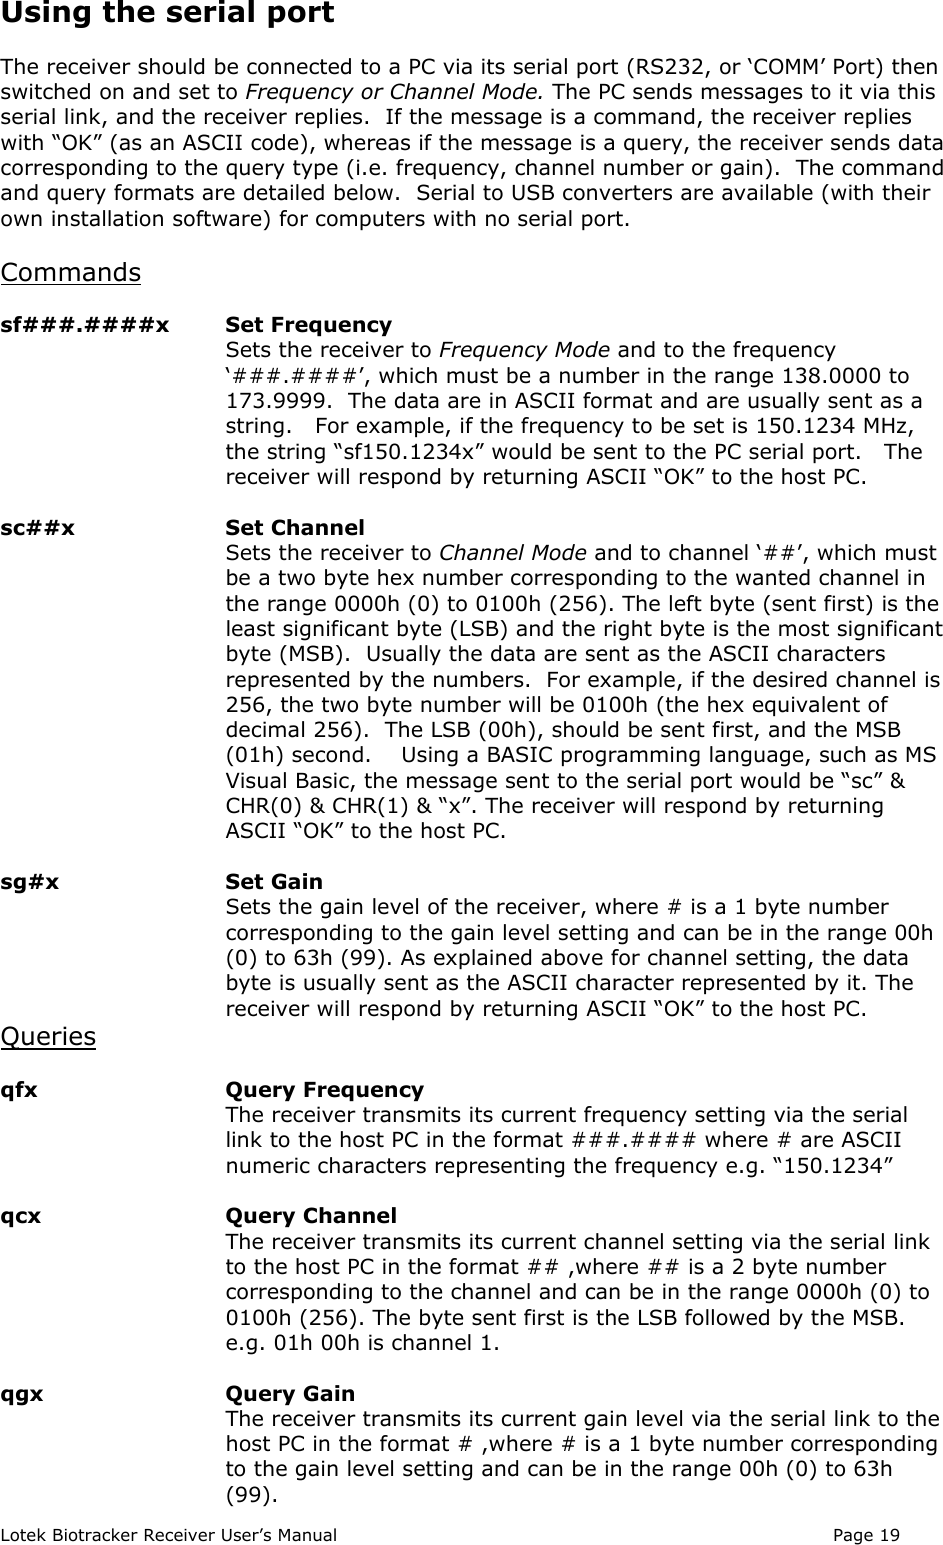 Lotek Biotracker Receiver User’s Manual Page 19Using the serial portThe receiver should be connected to a PC via its serial port (RS232, or ‘COMM’ Port) thenswitched on and set to Frequency or Channel Mode. The PC sends messages to it via thisserial link, and the receiver replies.  If the message is a command, the receiver replieswith “OK” (as an ASCII code), whereas if the message is a query, the receiver sends datacorresponding to the query type (i.e. frequency, channel number or gain).  The commandand query formats are detailed below.  Serial to USB converters are available (with theirown installation software) for computers with no serial port.Commandssf###.####x  Set FrequencySets the receiver to Frequency Mode and to the frequency‘###.####’, which must be a number in the range 138.0000 to173.9999.  The data are in ASCII format and are usually sent as astring.   For example, if the frequency to be set is 150.1234 MHz,the string “sf150.1234x” would be sent to the PC serial port.   Thereceiver will respond by returning ASCII “OK” to the host PC.sc##x  Set ChannelSets the receiver to Channel Mode and to channel ‘##’, which mustbe a two byte hex number corresponding to the wanted channel inthe range 0000h (0) to 0100h (256). The left byte (sent first) is theleast significant byte (LSB) and the right byte is the most significantbyte (MSB).  Usually the data are sent as the ASCII charactersrepresented by the numbers.  For example, if the desired channel is256, the two byte number will be 0100h (the hex equivalent ofdecimal 256).  The LSB (00h), should be sent first, and the MSB(01h) second.    Using a BASIC programming language, such as MSVisual Basic, the message sent to the serial port would be “sc” &amp;CHR(0) &amp; CHR(1) &amp; “x”. The receiver will respond by returningASCII “OK” to the host PC.sg#x  Set GainSets the gain level of the receiver, where # is a 1 byte numbercorresponding to the gain level setting and can be in the range 00h(0) to 63h (99). As explained above for channel setting, the databyte is usually sent as the ASCII character represented by it. Thereceiver will respond by returning ASCII “OK” to the host PC.Queriesqfx Query FrequencyThe receiver transmits its current frequency setting via the seriallink to the host PC in the format ###.#### where # are ASCIInumeric characters representing the frequency e.g. “150.1234”qcx Query ChannelThe receiver transmits its current channel setting via the serial linkto the host PC in the format ## ,where ## is a 2 byte numbercorresponding to the channel and can be in the range 0000h (0) to0100h (256). The byte sent first is the LSB followed by the MSB.e.g. 01h 00h is channel 1.qgx Query GainThe receiver transmits its current gain level via the serial link to thehost PC in the format # ,where # is a 1 byte number correspondingto the gain level setting and can be in the range 00h (0) to 63h(99).